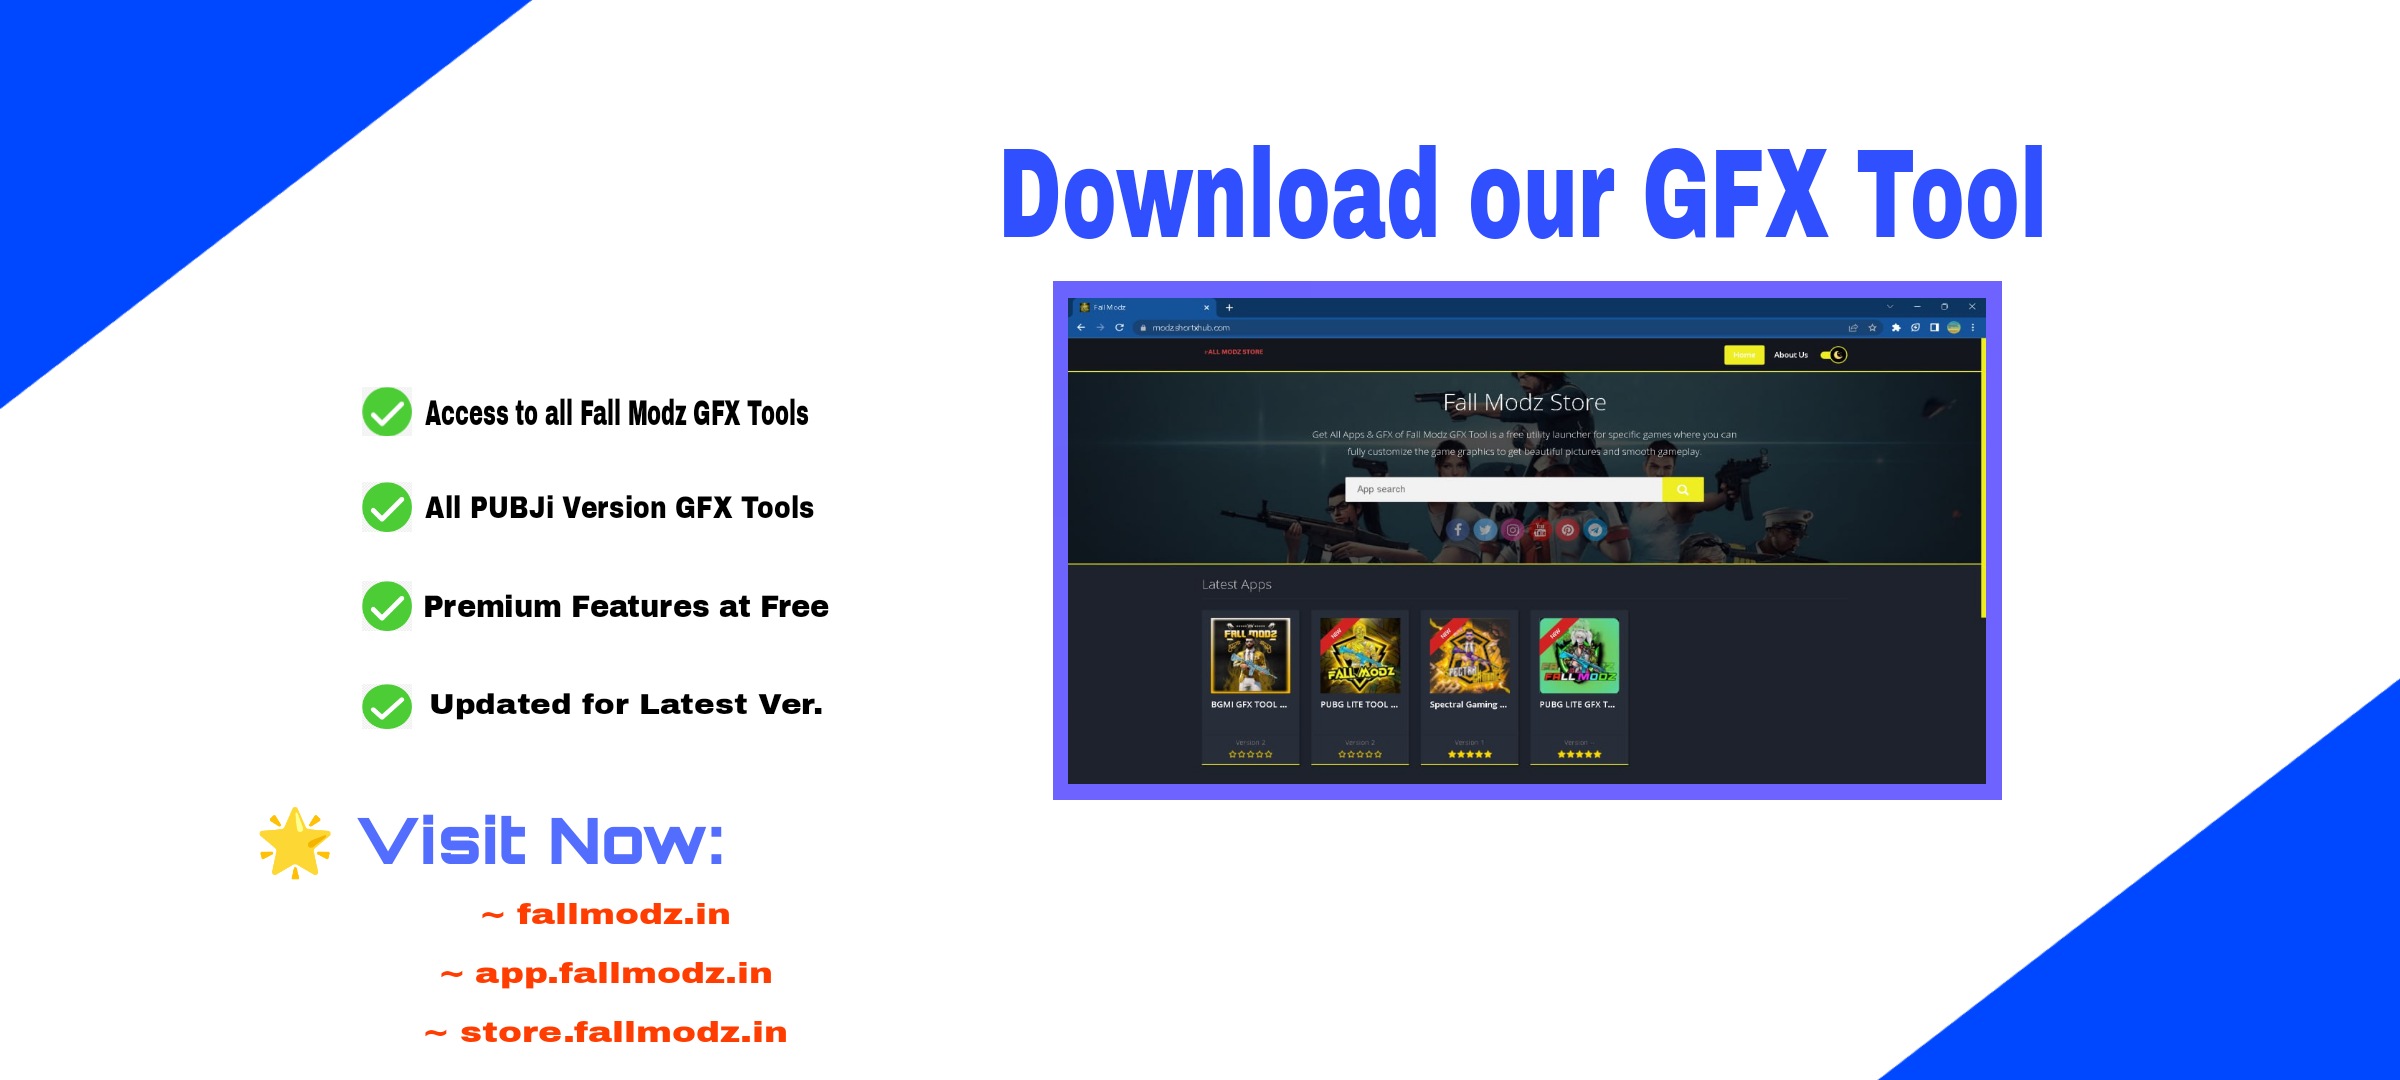 Download our GFX Tool